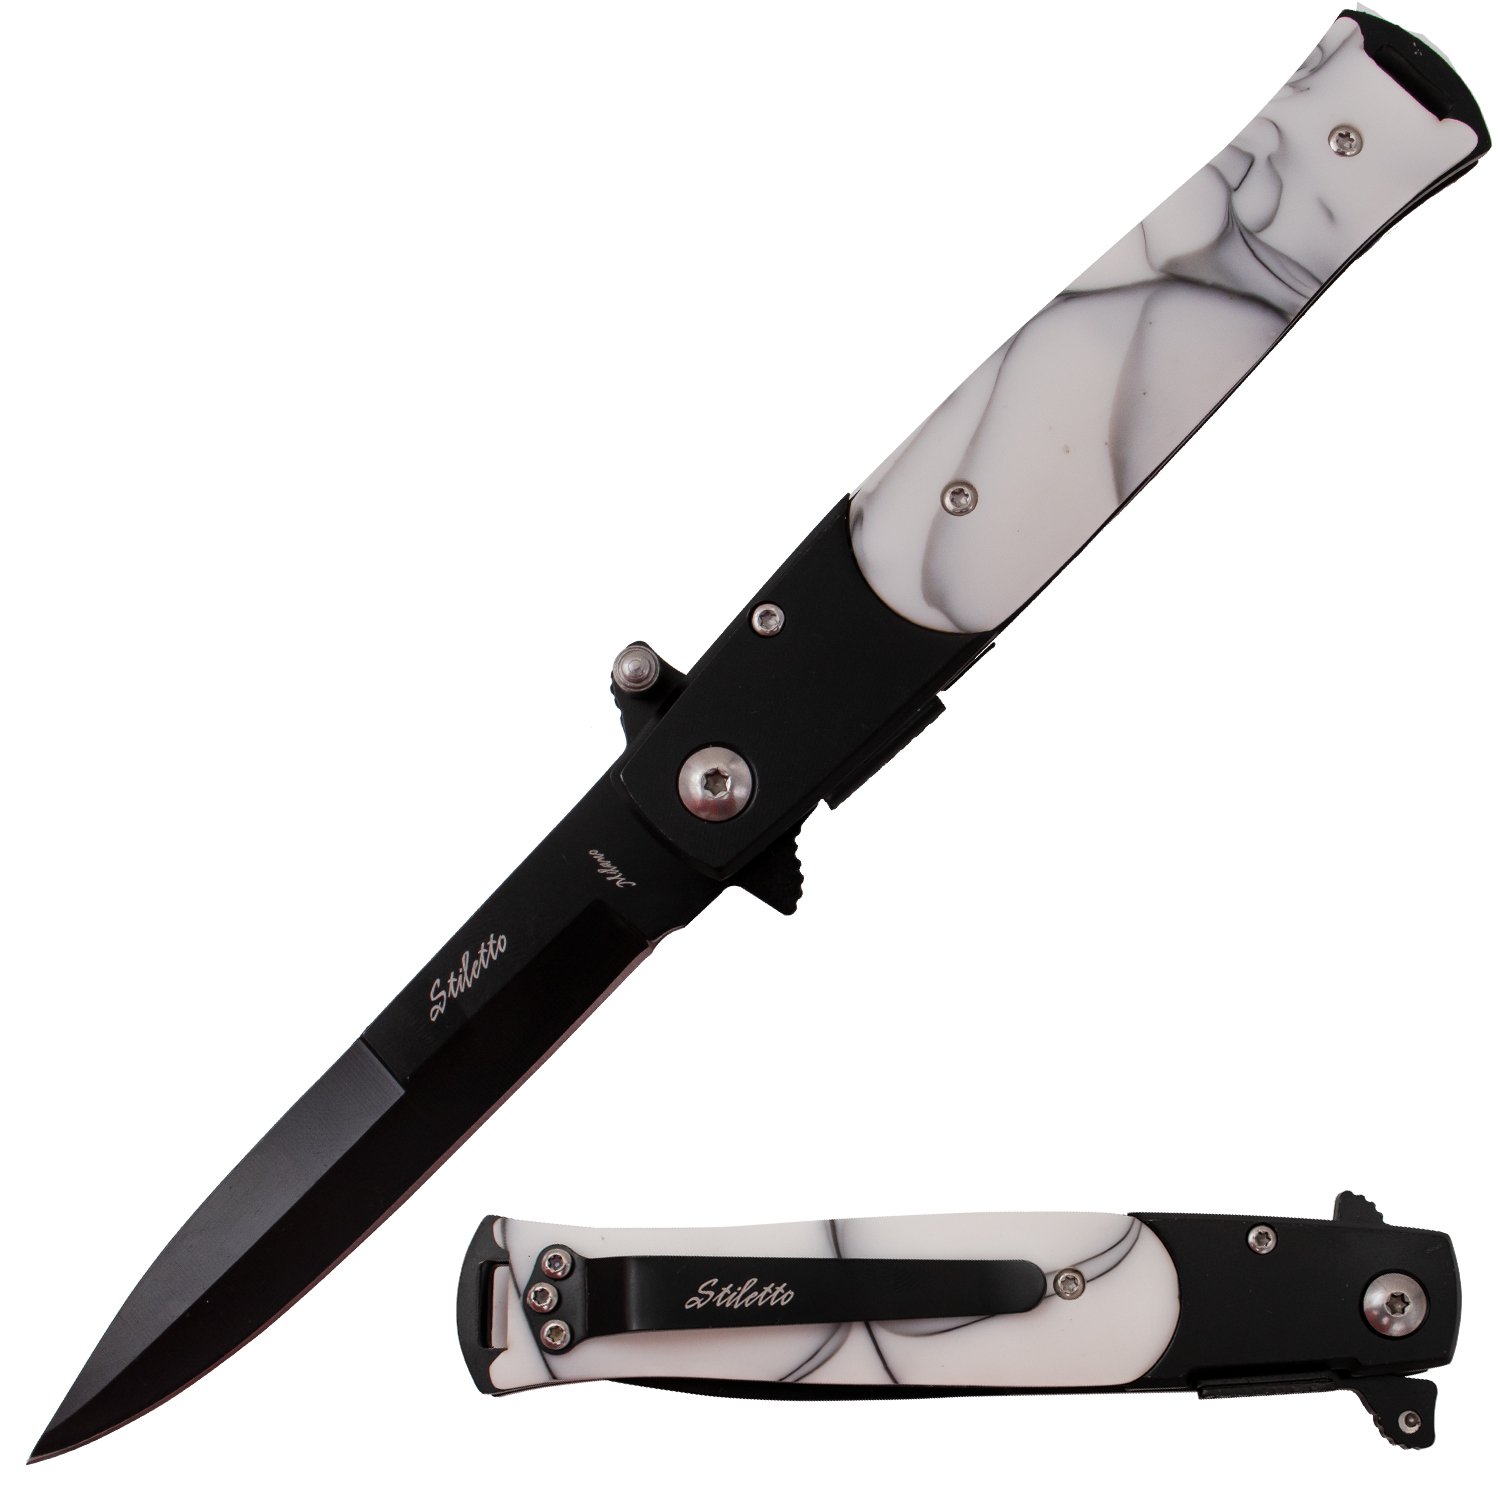 Tiger USA Trigger Action Stiletto Knife White Pearl Handle